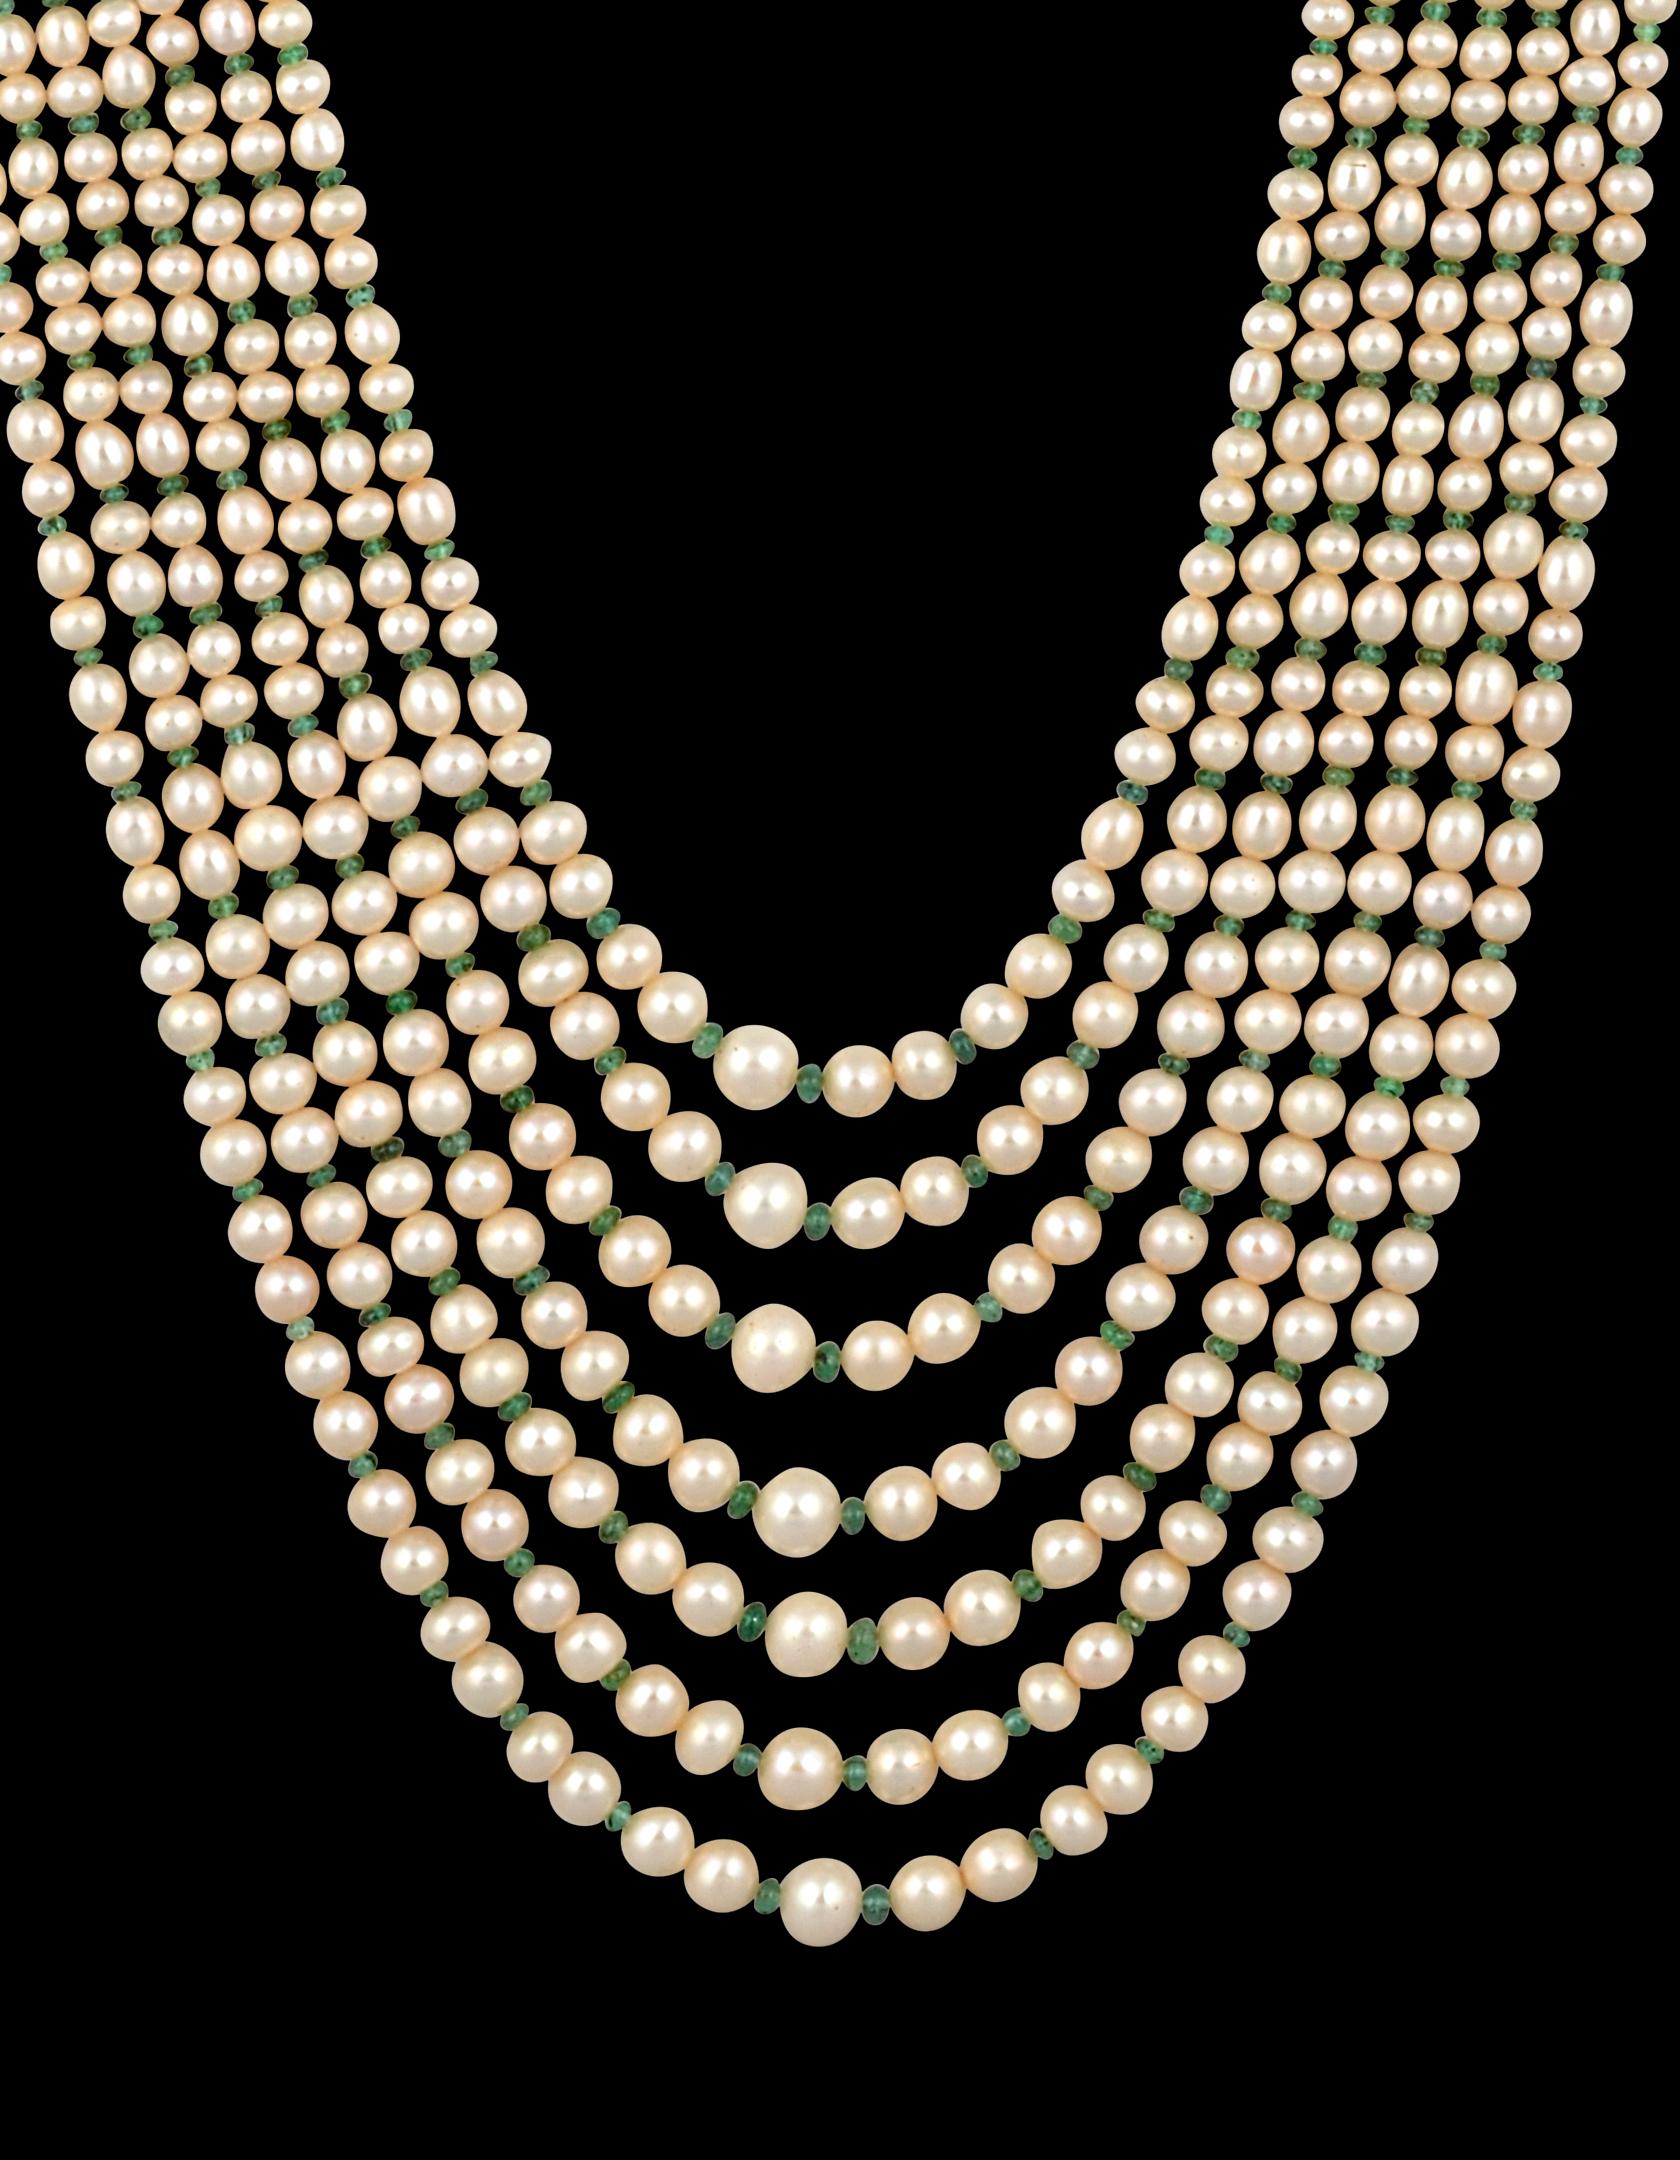  7 Layers of  Fresh water  Pearl with Emerald Beads with  14 Karat yellow gold Spacer clasp Opera Length Necklace
The opera length multi layer pearl necklace set consists of 7  original strands of Natural pearls of lovely nacre, lustre, and